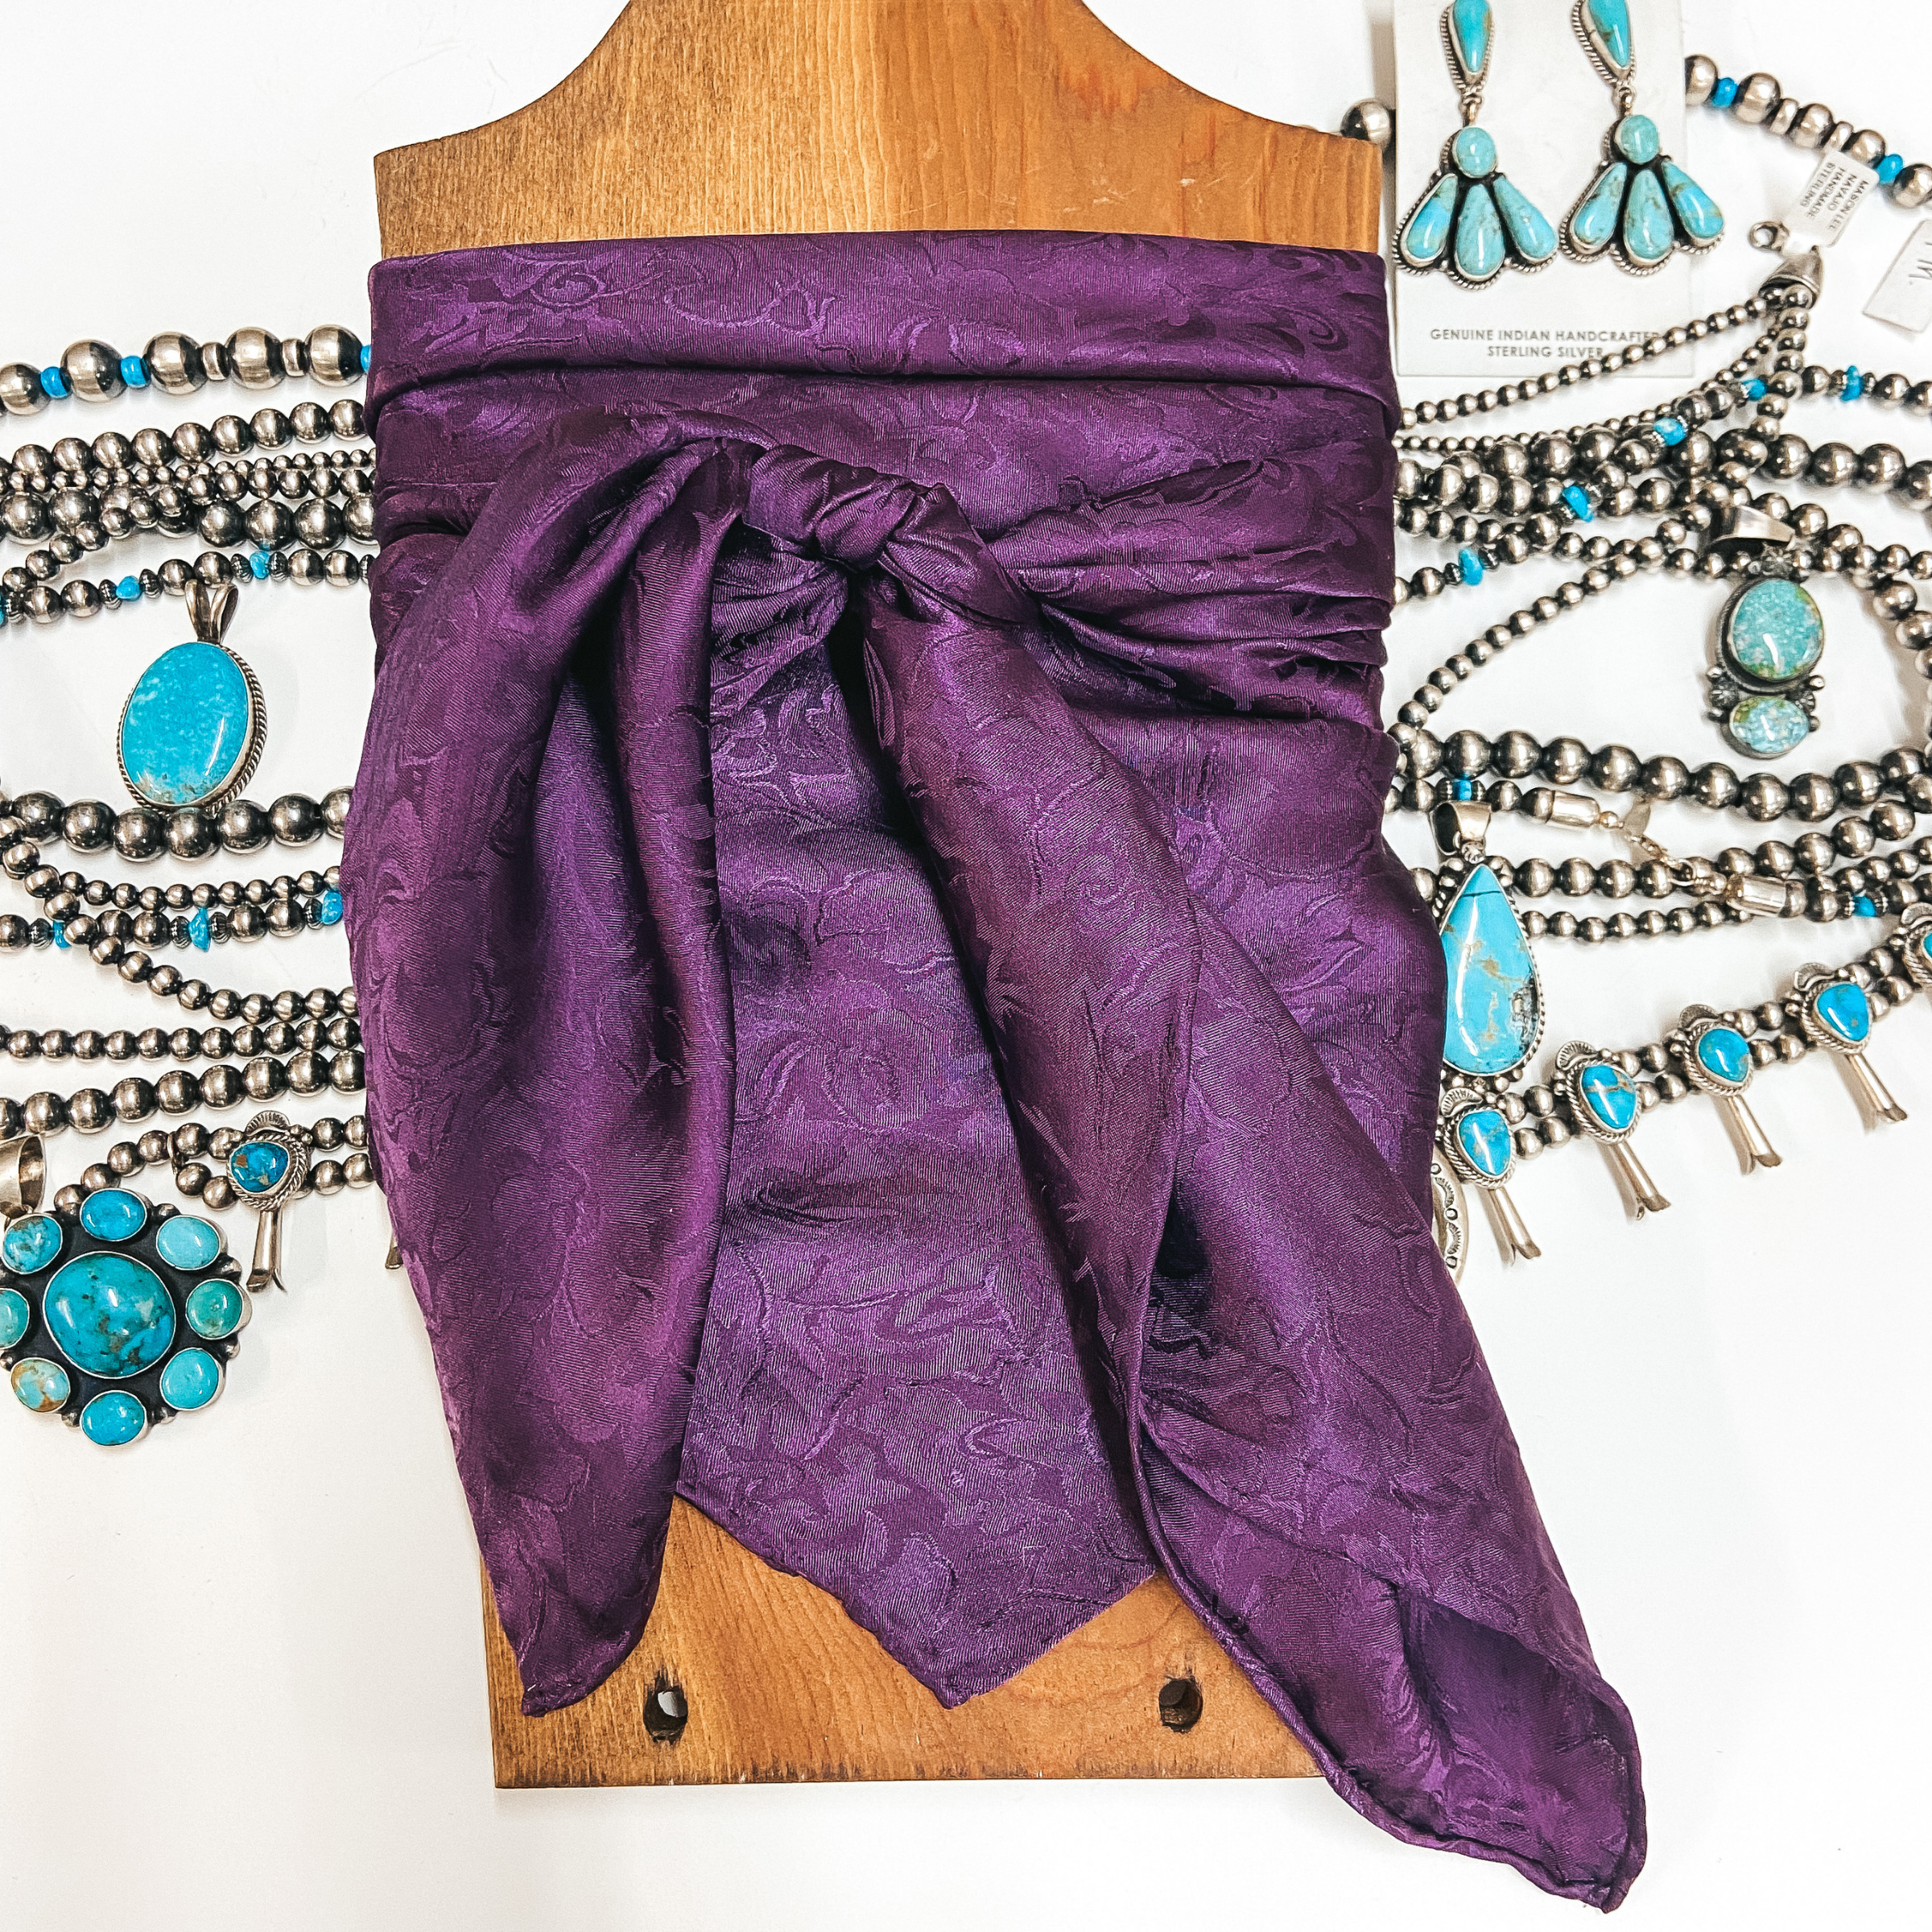 A jacquard print wild rag tied around a wooden display. Pictured on white background with sterling silver and turquoise jewelry.